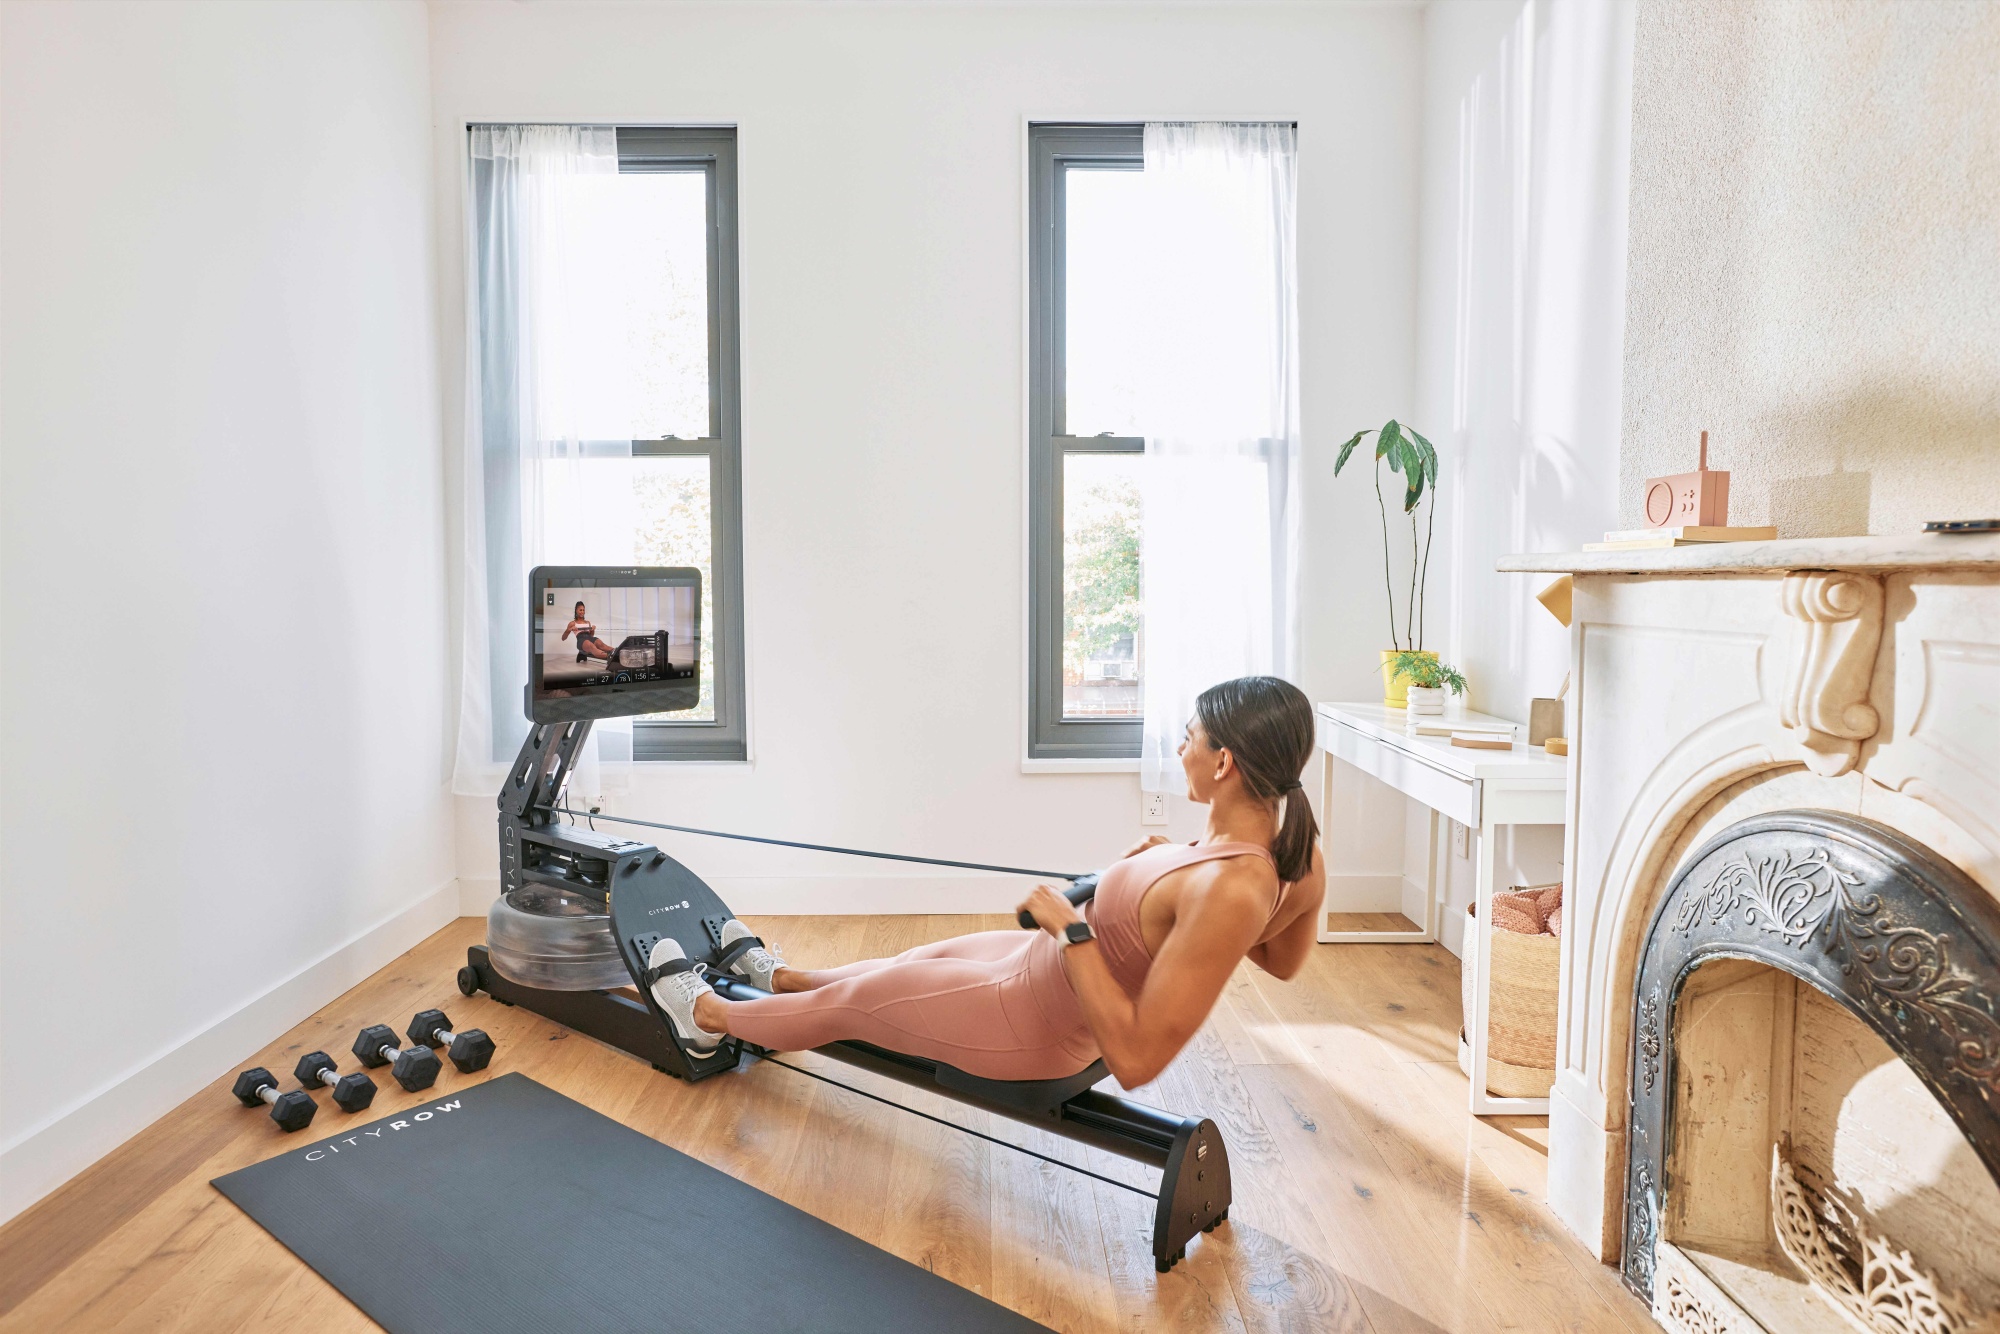 CityRow began as an in-person rowing studio in New York in 2014, before expanding to at-home digital fitness in 2018.